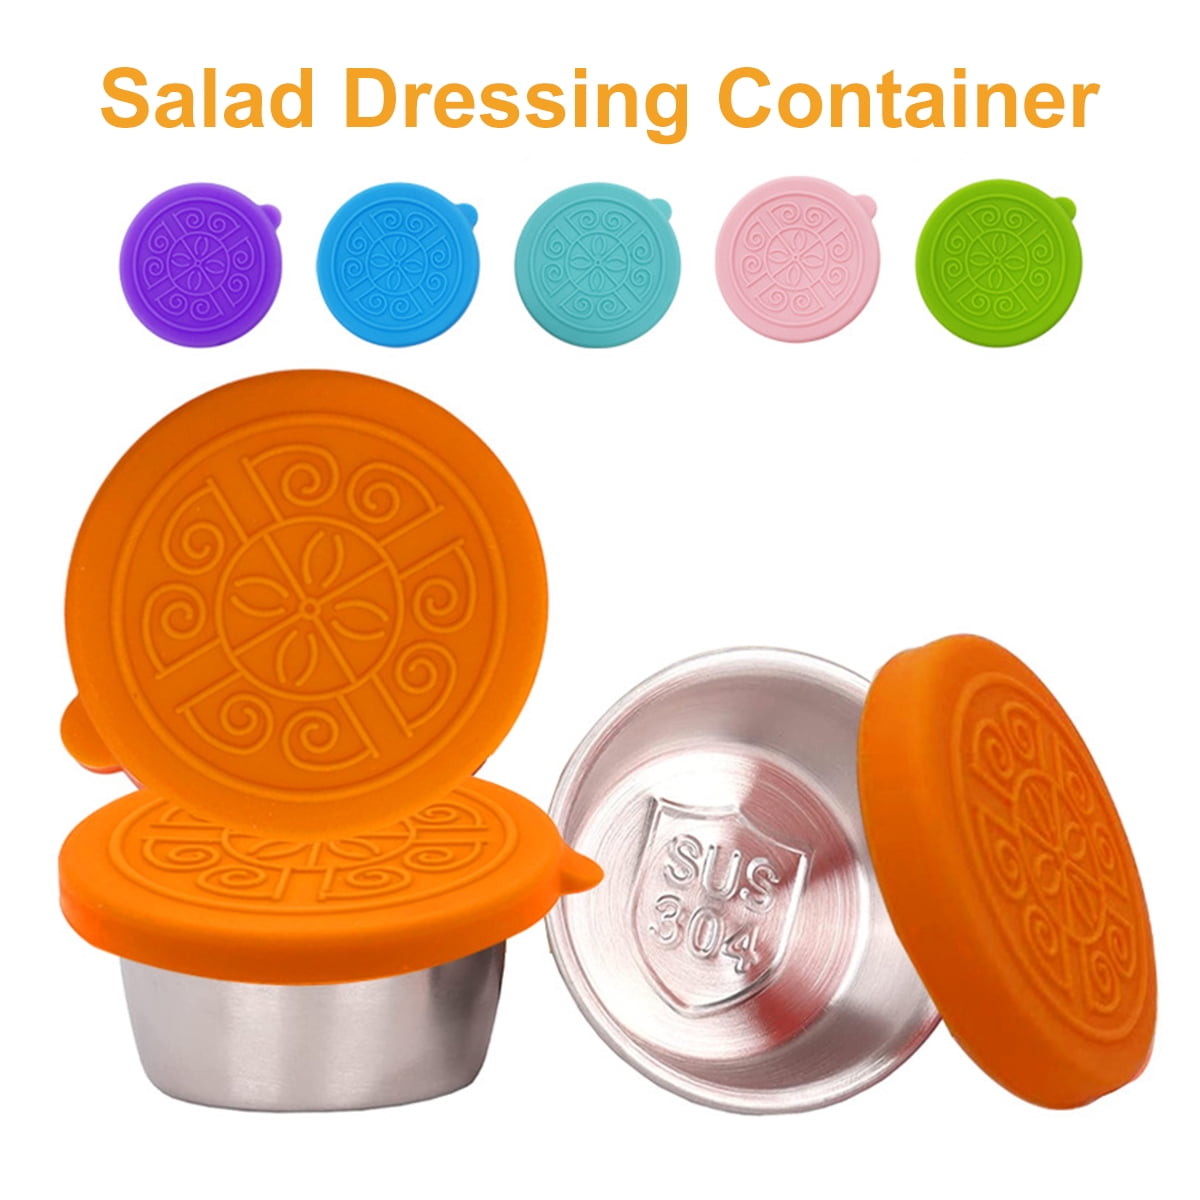  Mfacoy 6 Pack Salad Dressing Container To Go, 2.5 OZ Plastic  Condiment Containers with Lids, BPA Free Condiment Cups, Leak Proof and  Reusable Small Containers with Lids for Lunch Box Picnic